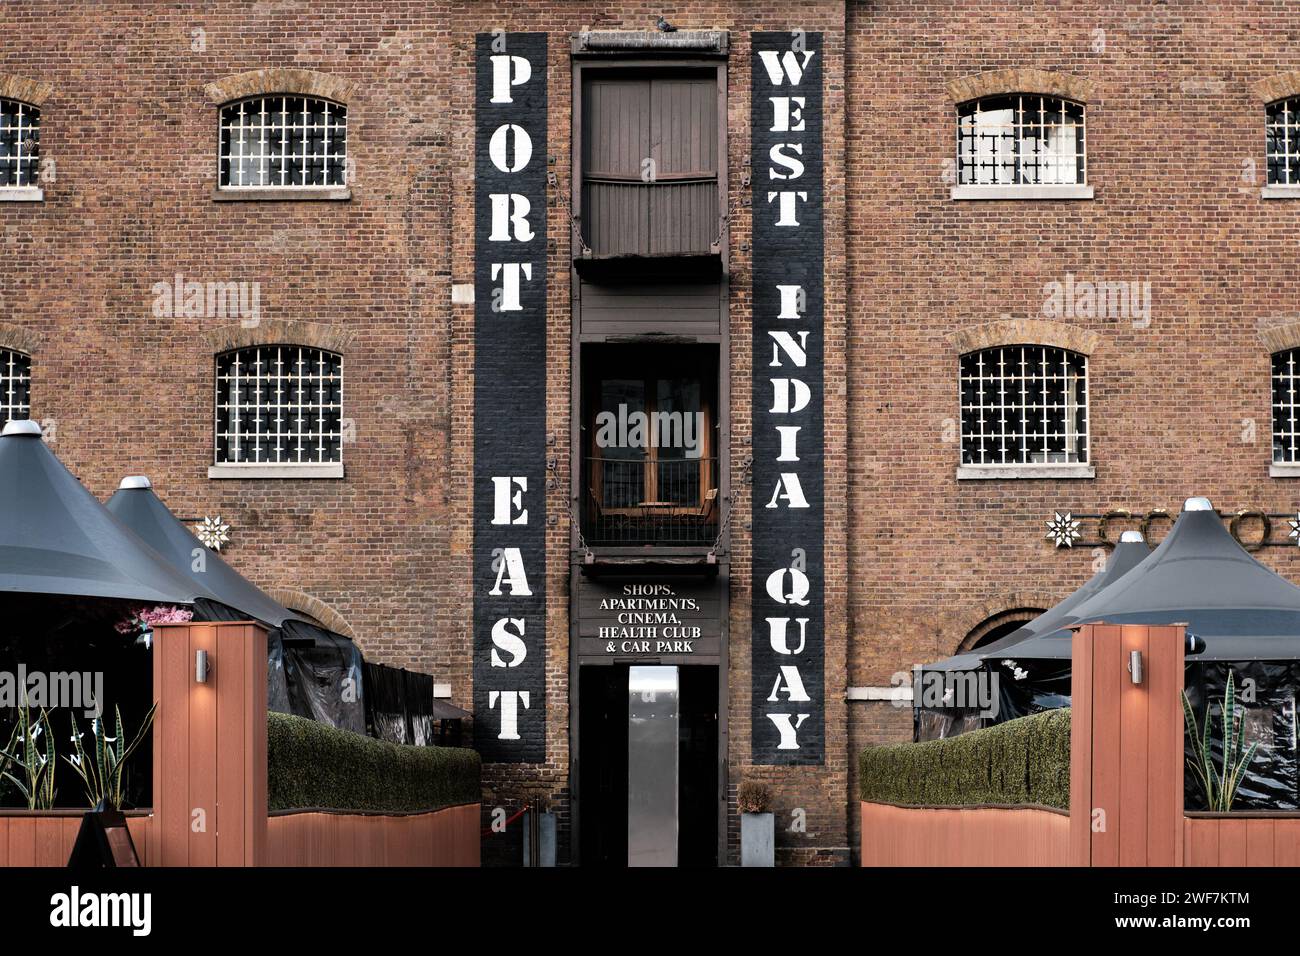 Port East warehouse, restaurant. apartments and shopping arcade, West India Quay, Canary Wharf, London Stock Photo